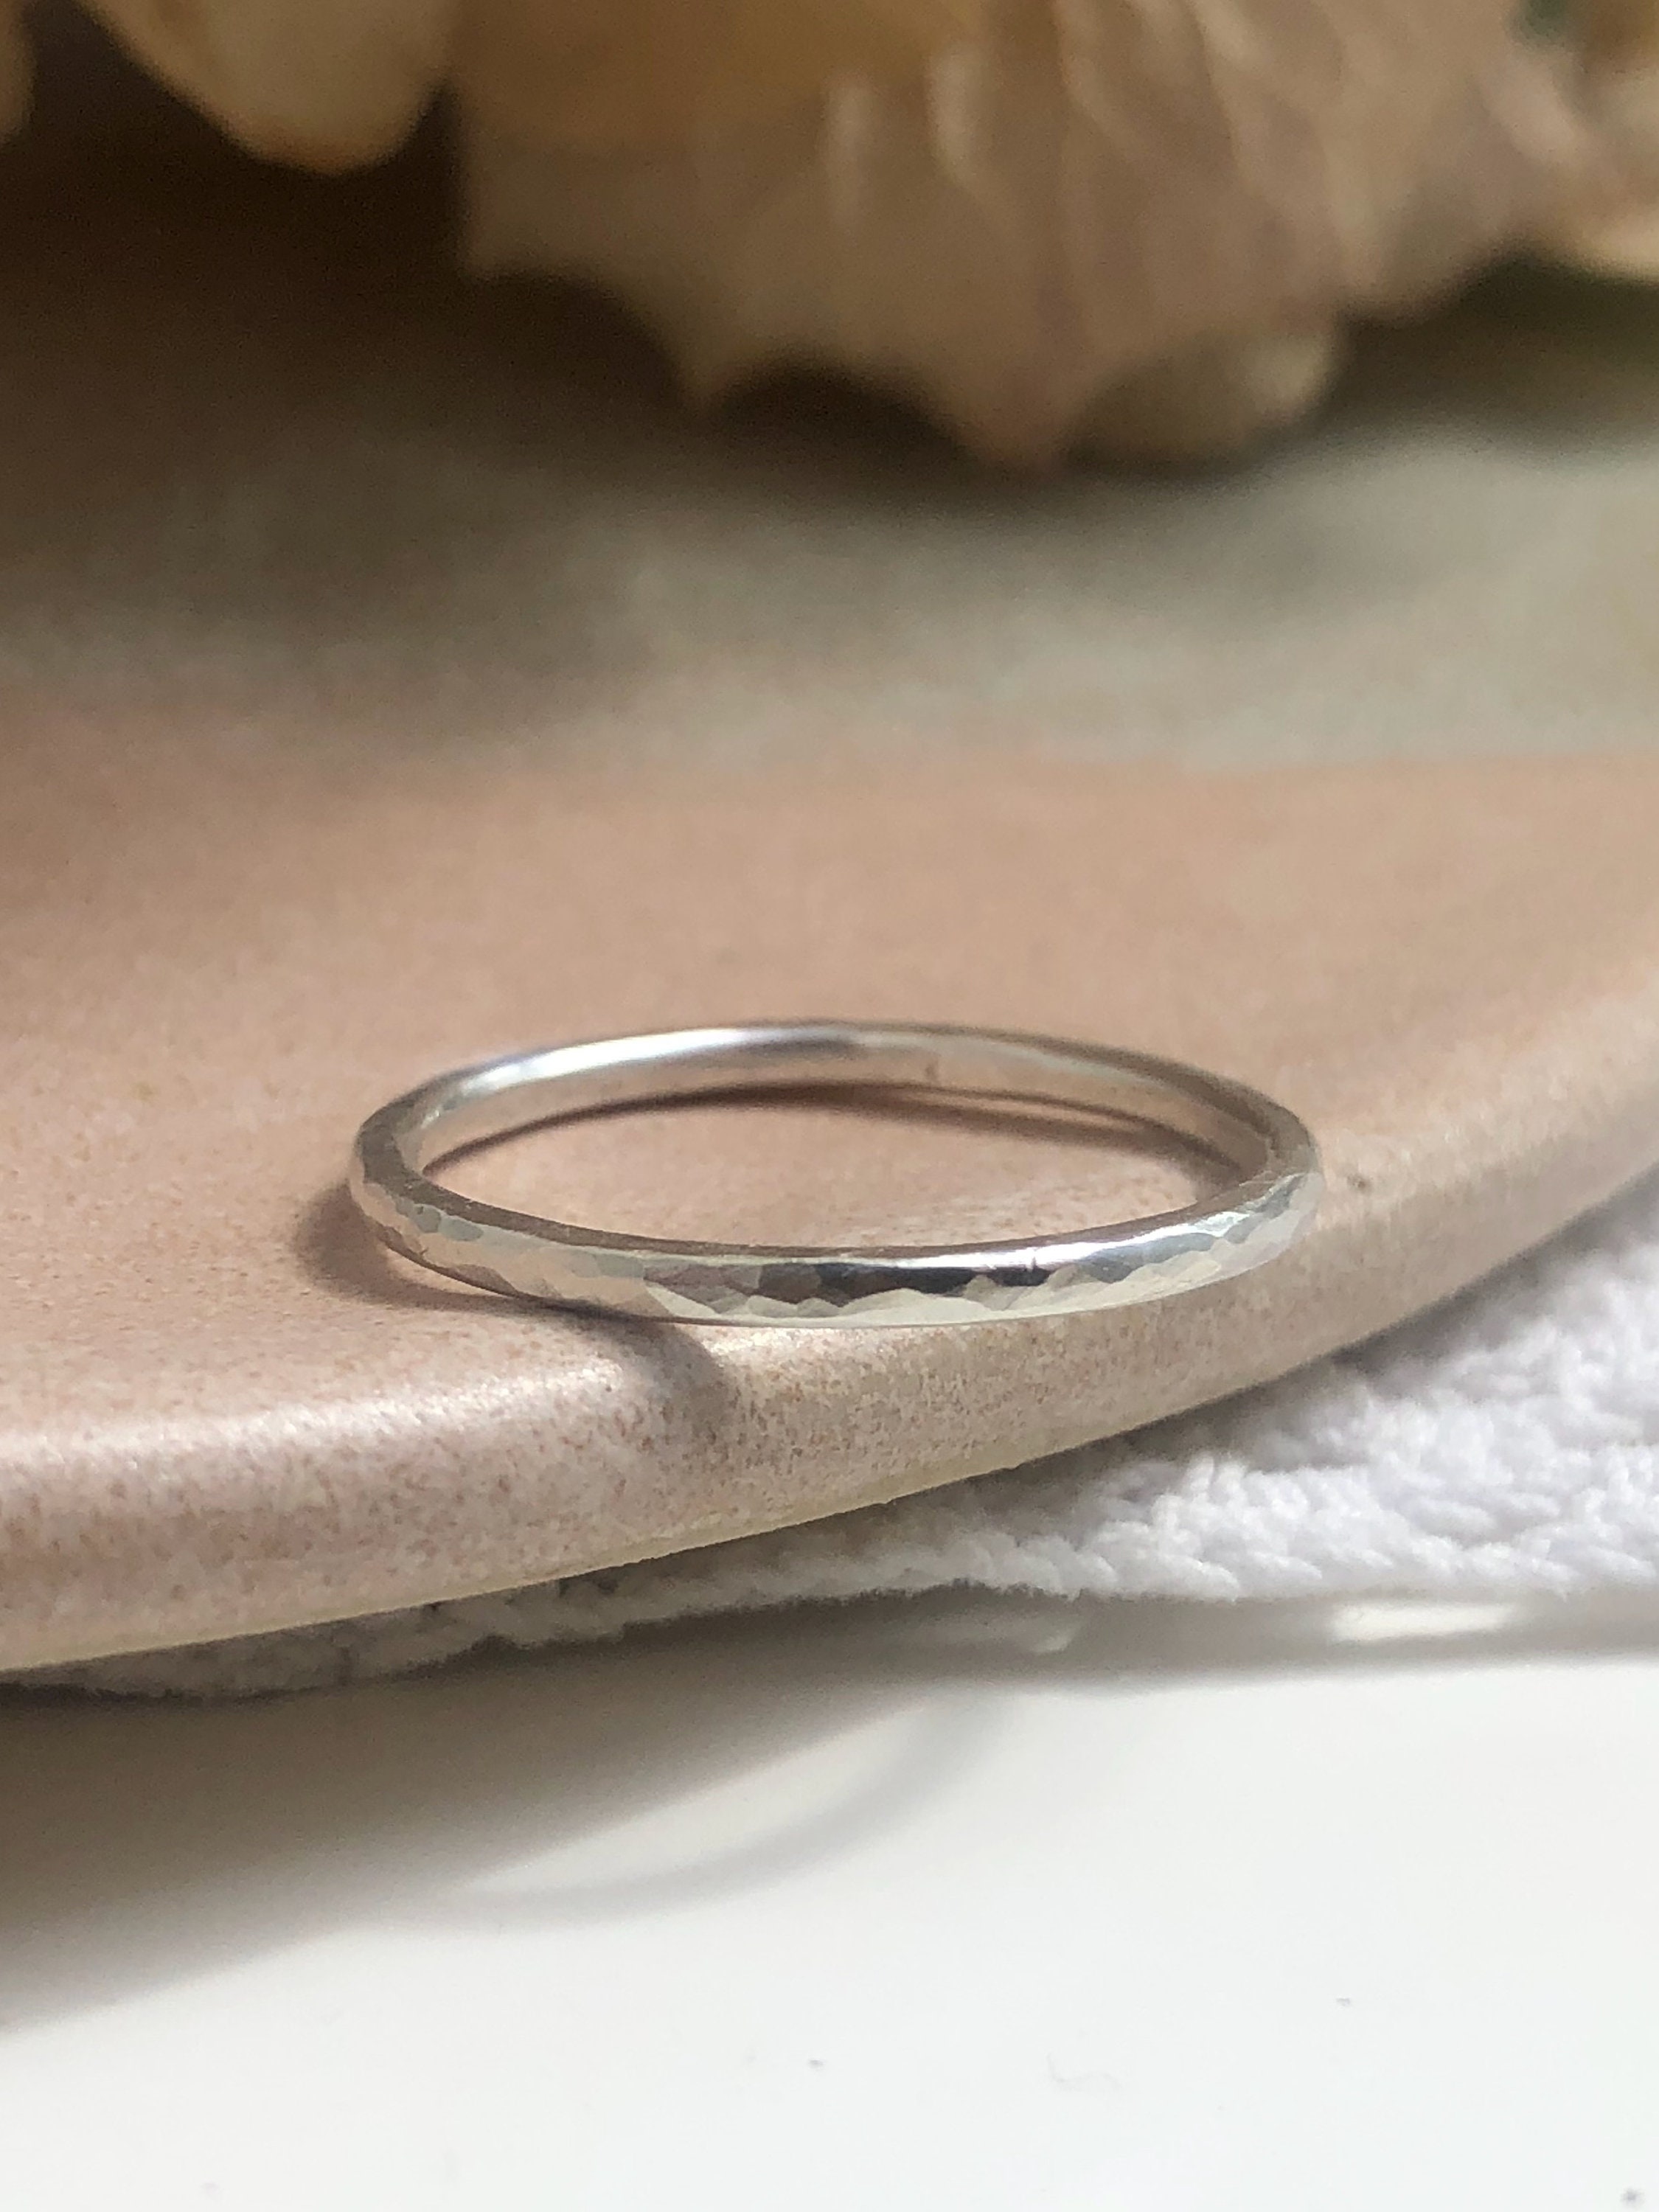 Recycled Sterling Silver Textured Stacking Ring - Slim Alternative Wedding Band Sustainable Jewellery